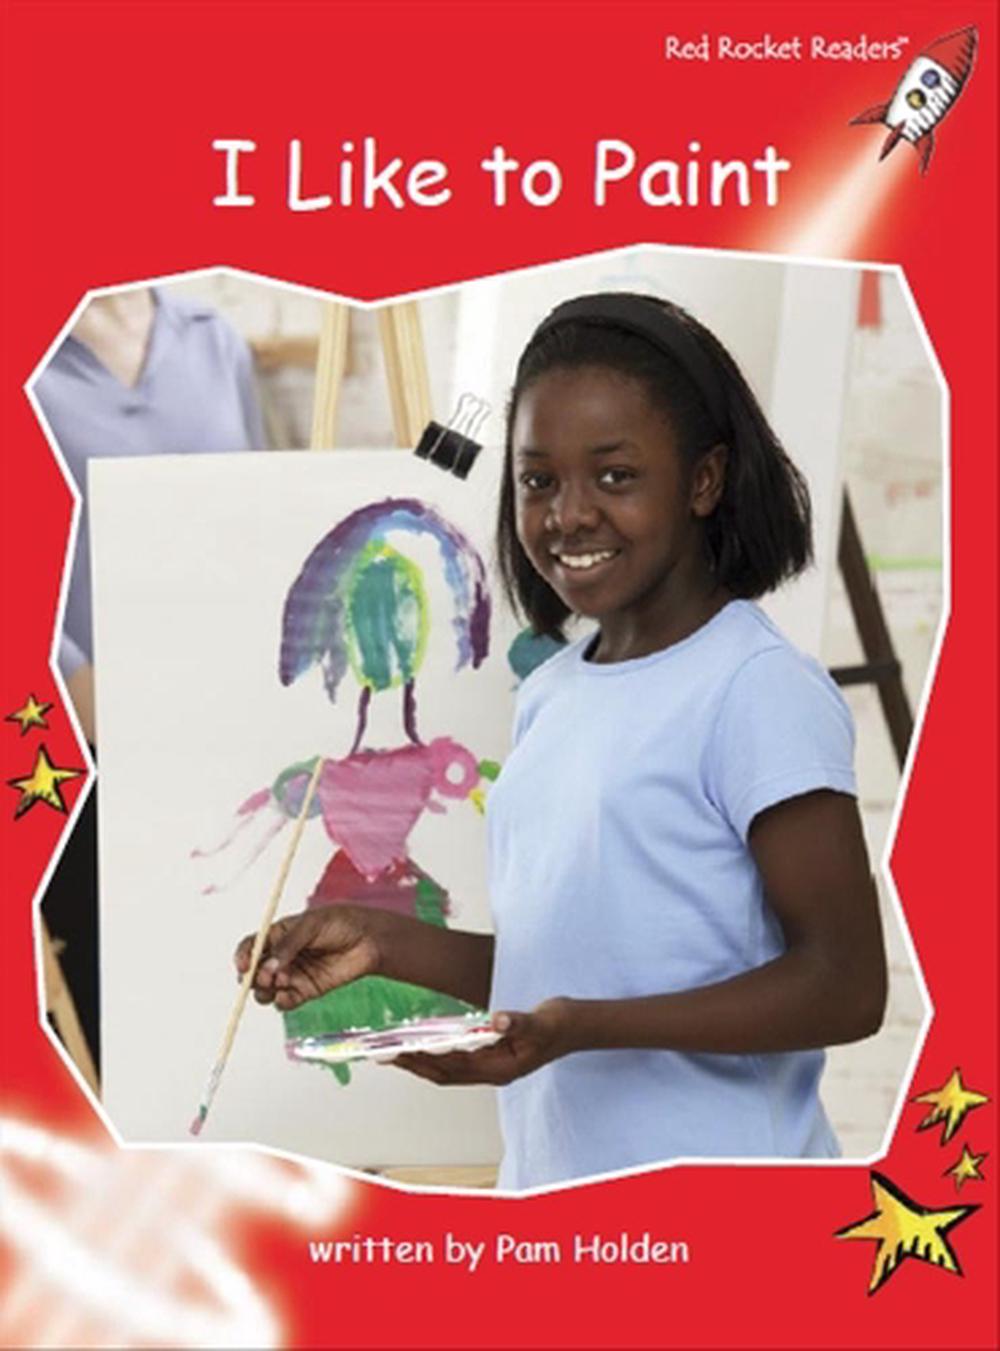 Red Rocket Readers: Early Level 1 Non-Fiction Set B: I Like to Paint by